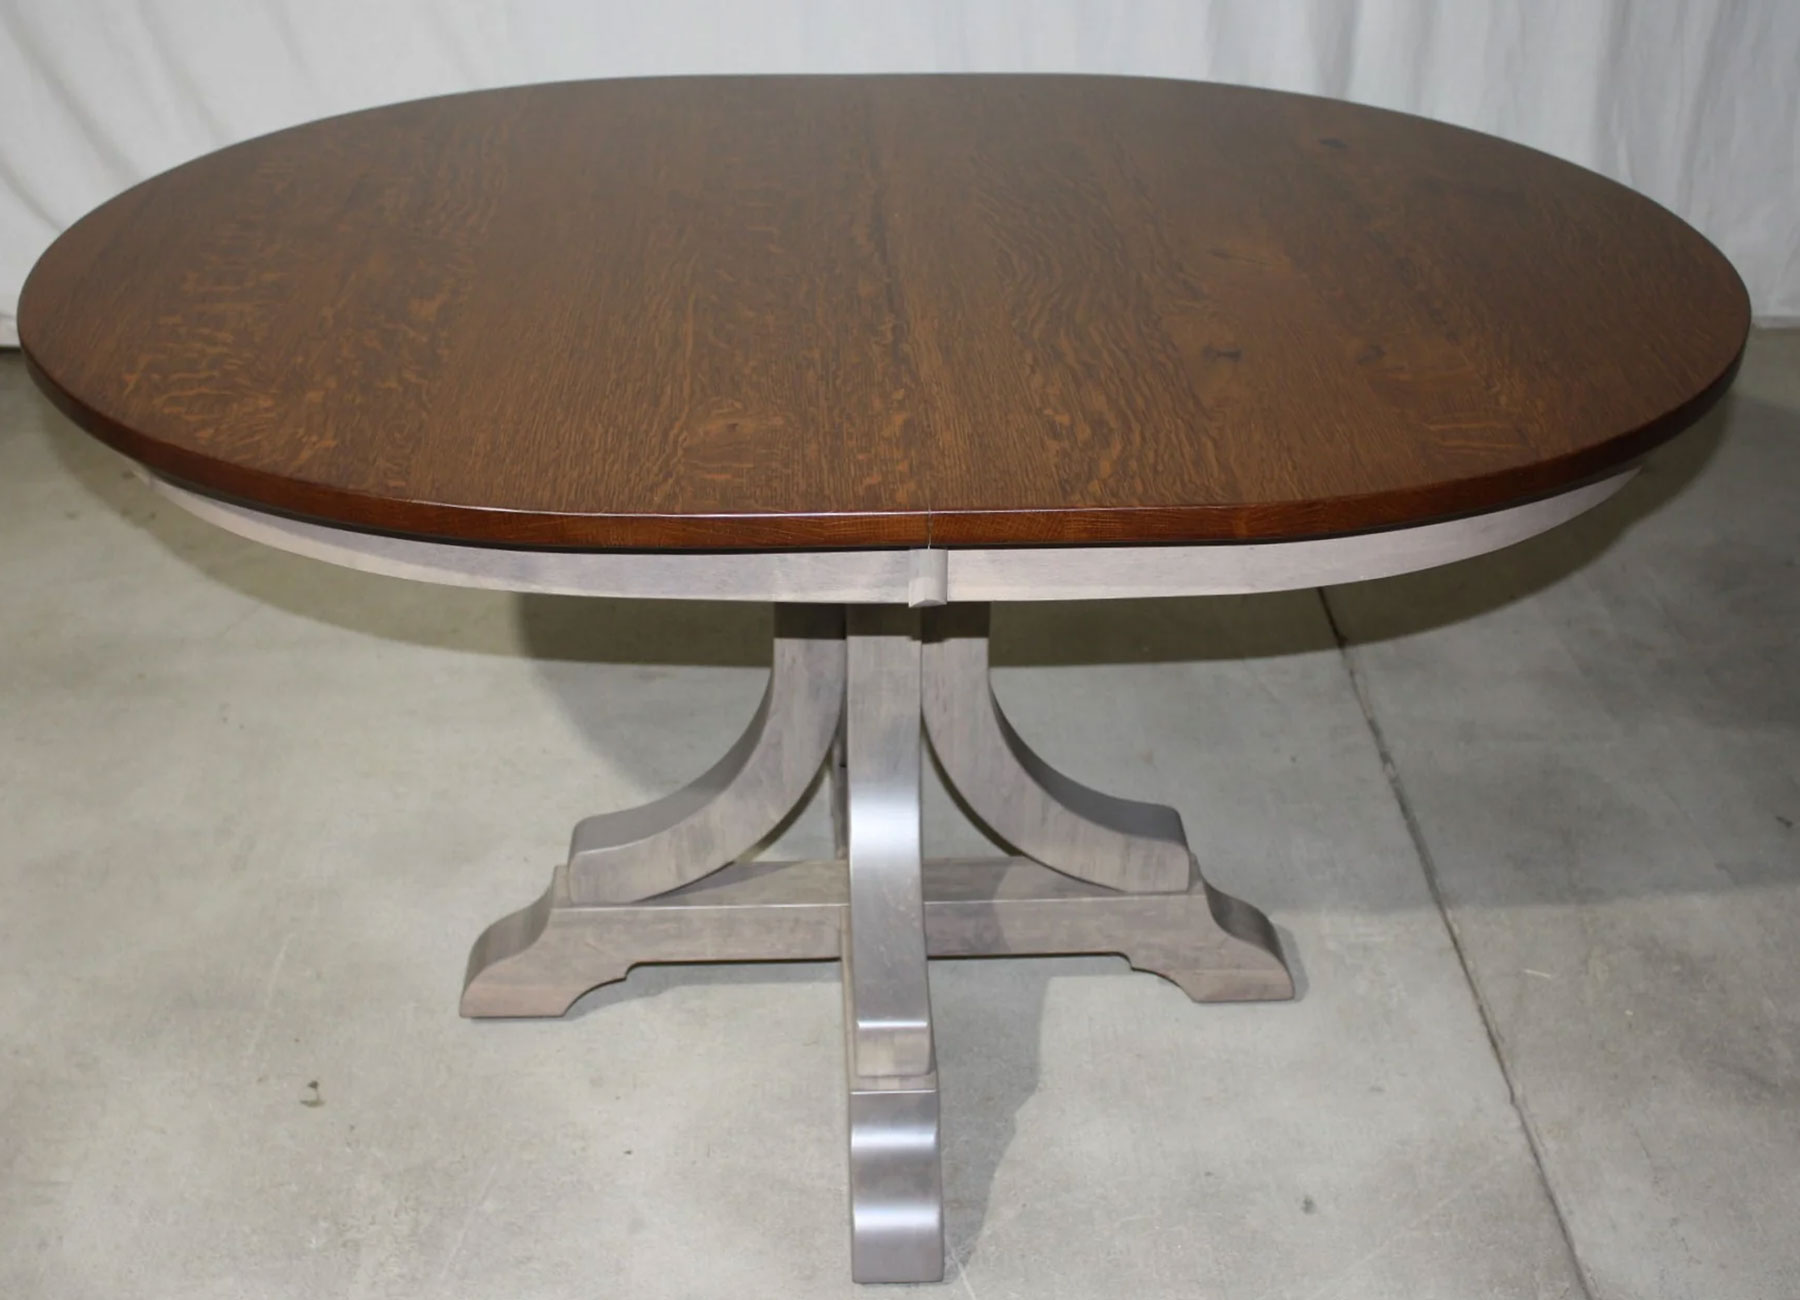 Roseburg 42 x 54 Oval Shaped Single Pedestal Table with (2) Leaf Extensions in Rustic Quartersawn White Oak